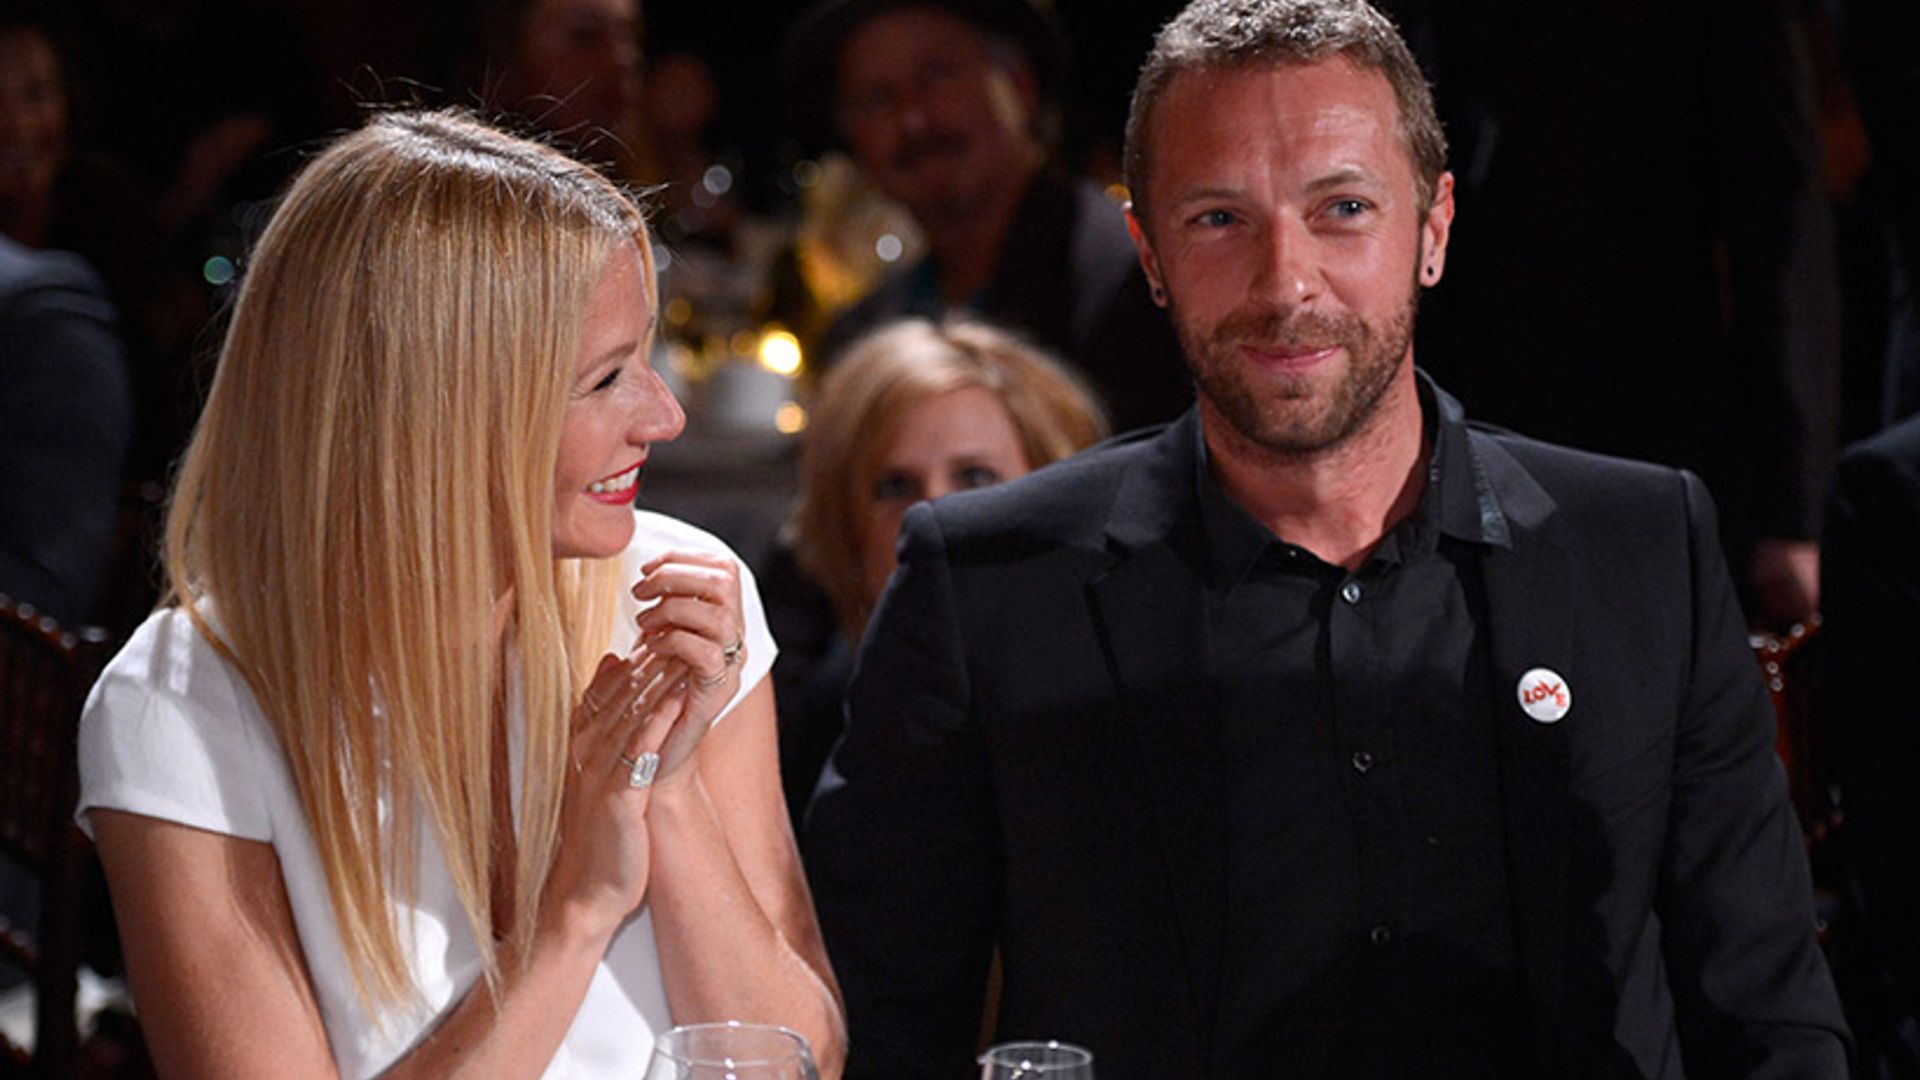 Gwyneth Paltrow and Chris Martin finalise divorce two years after 'consciously uncoupling'